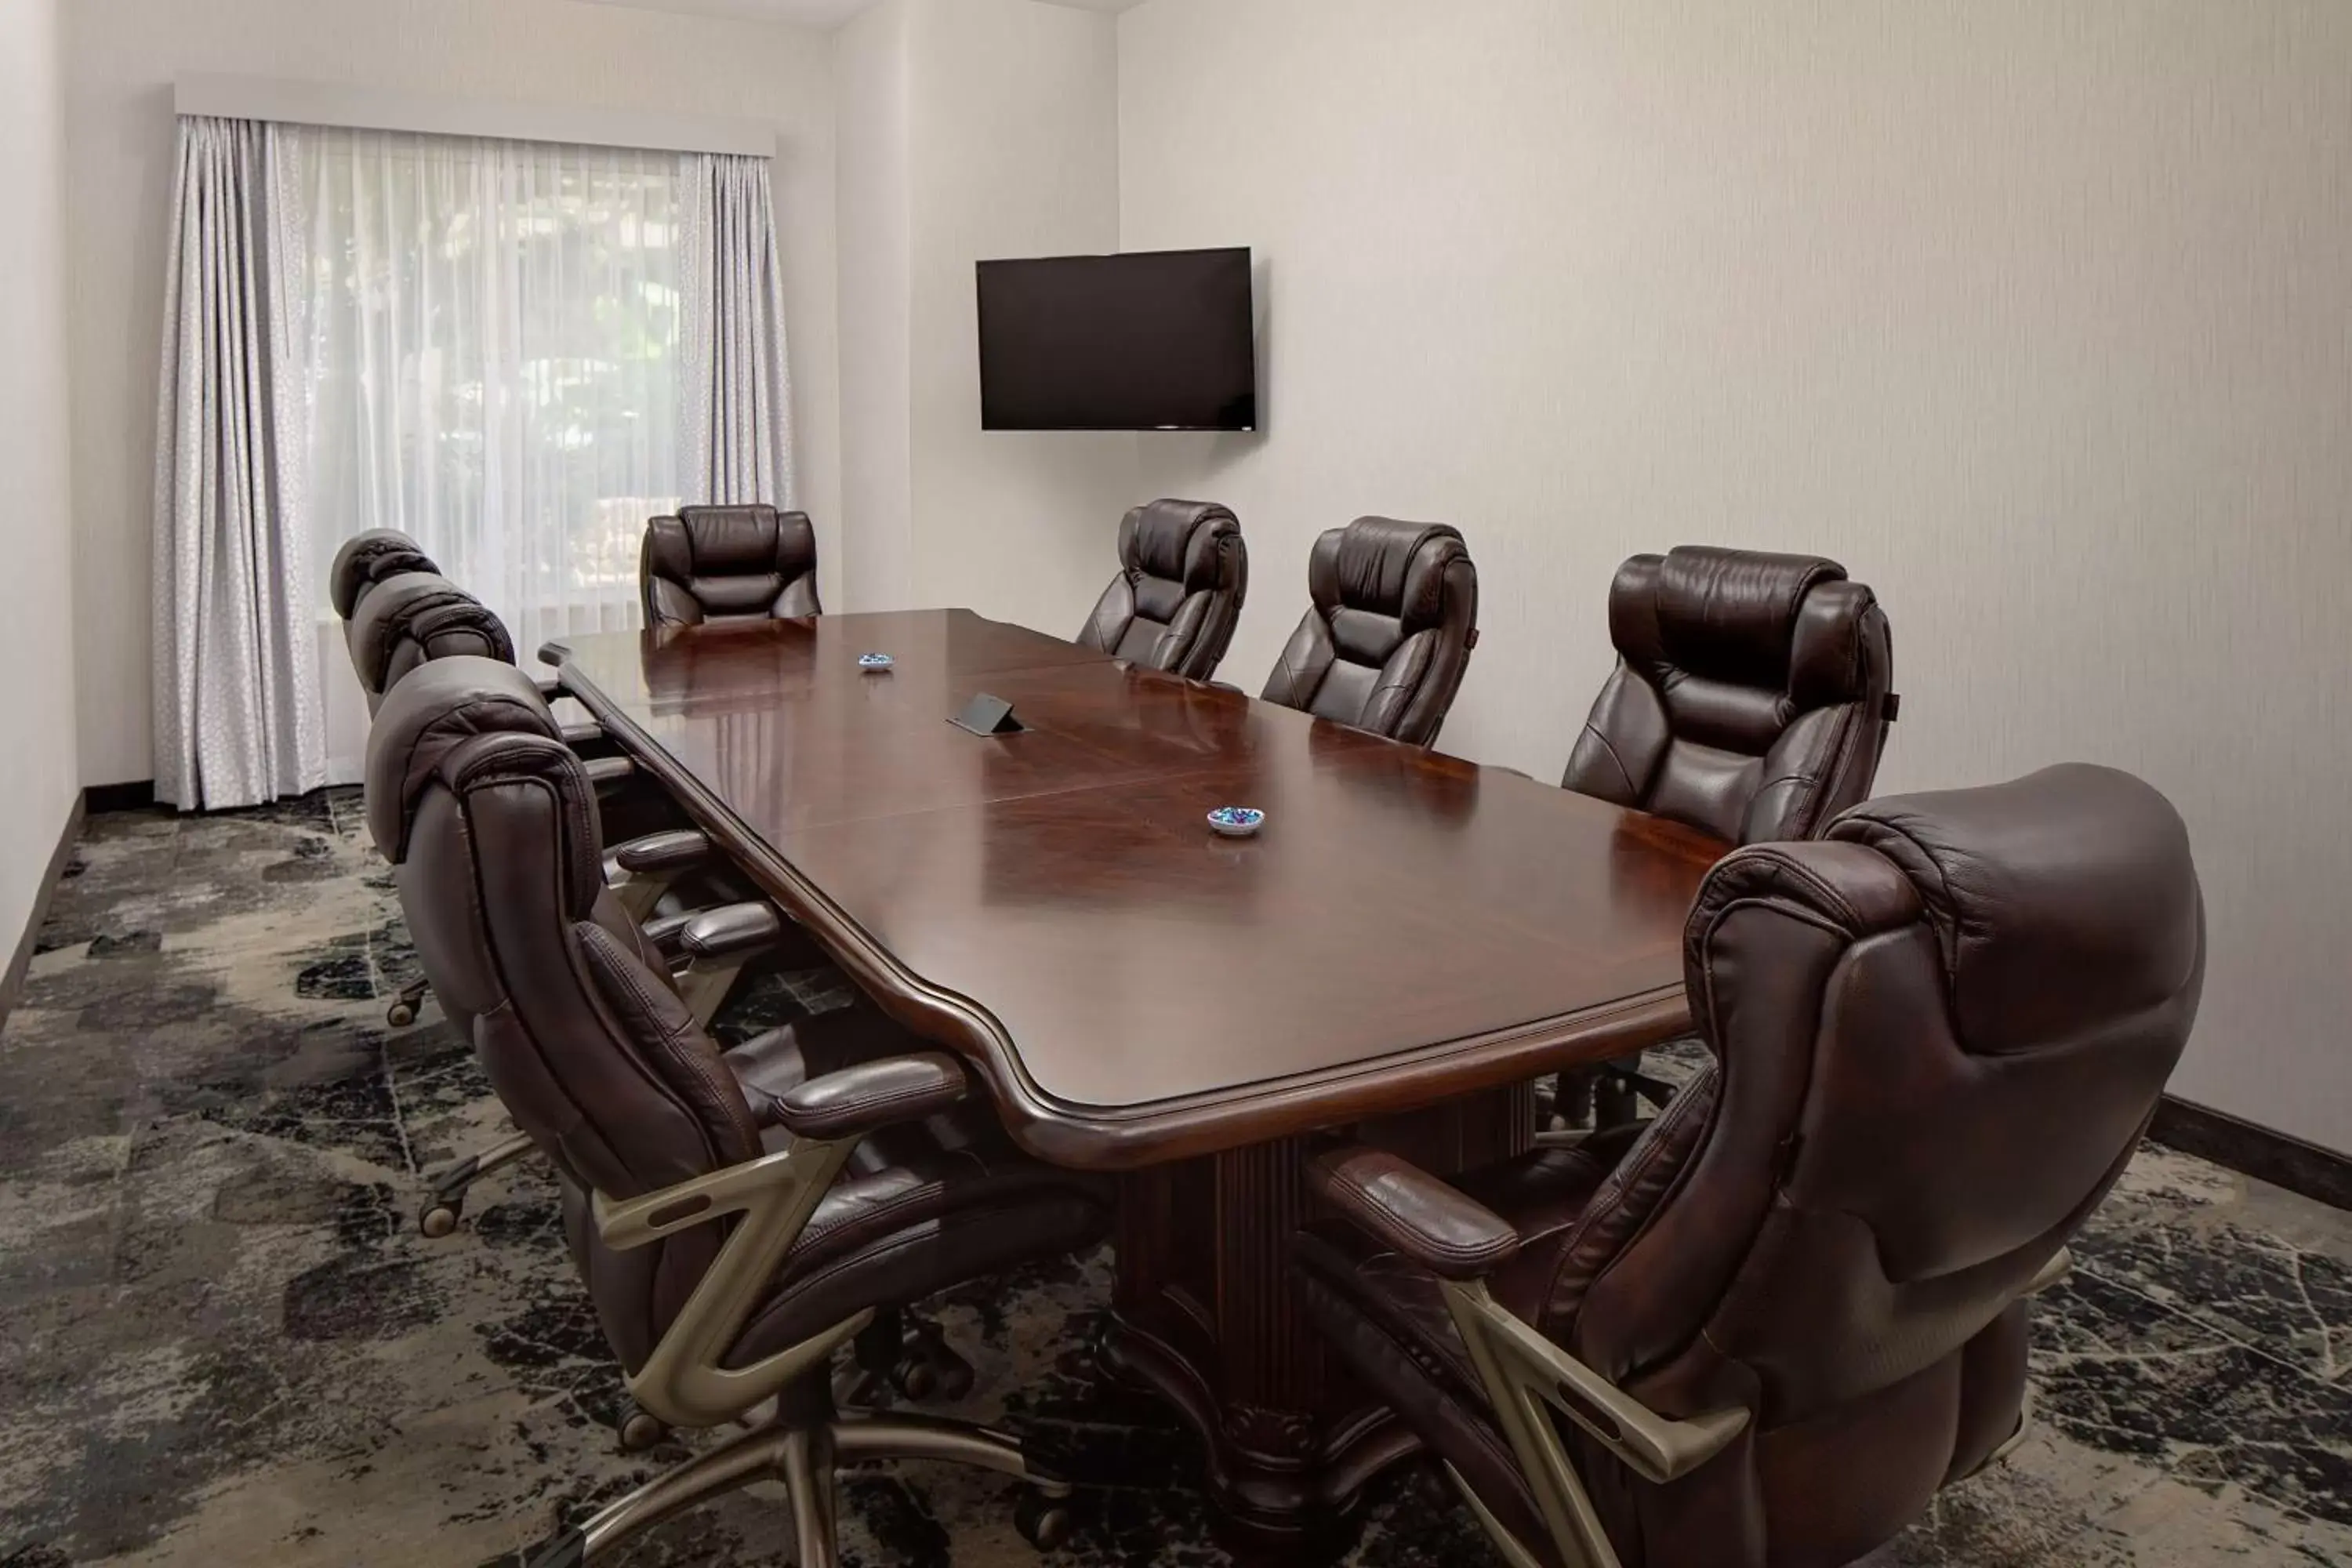 Meeting/conference room in Hilton Garden Inn DFW Airport South